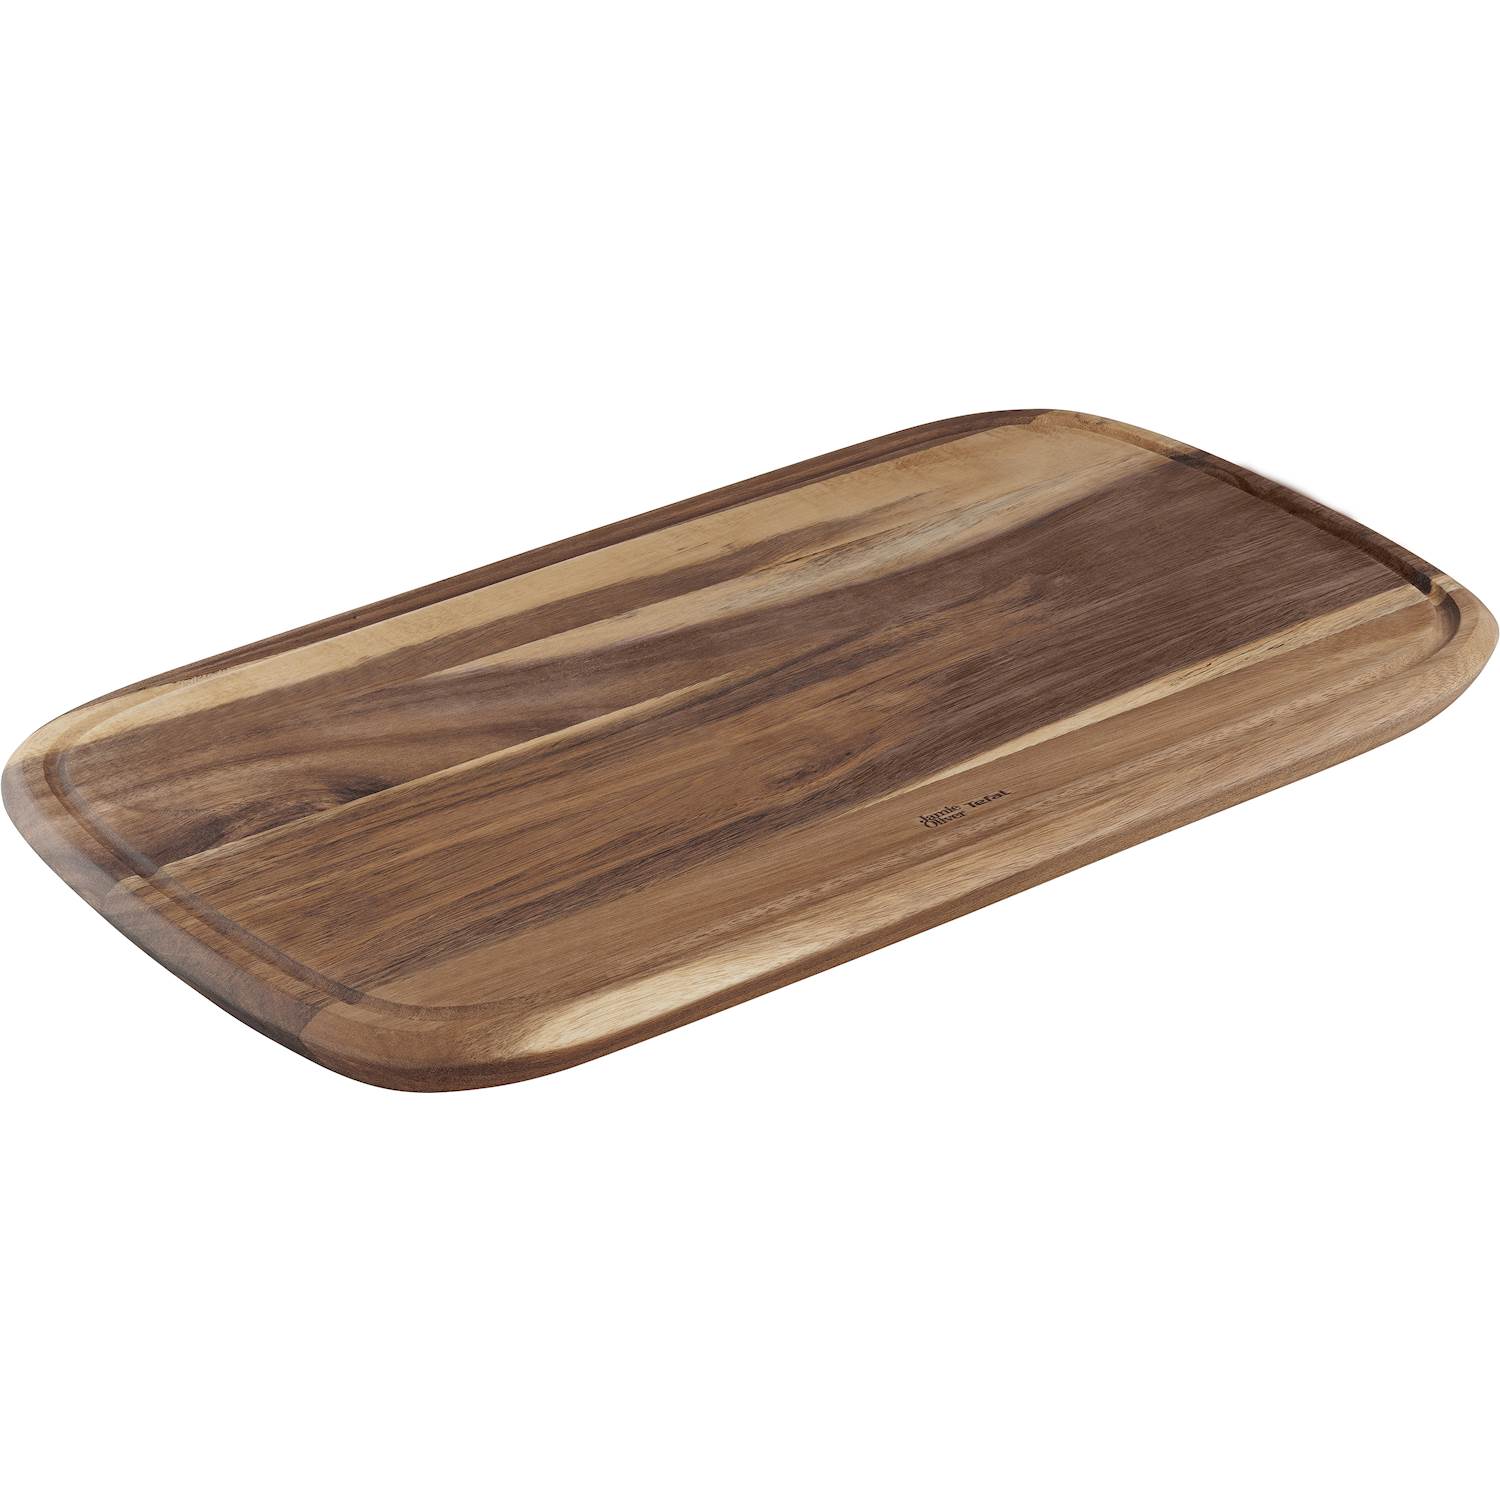 JAMIE OLIVER TEFAL Chopping Board  Large